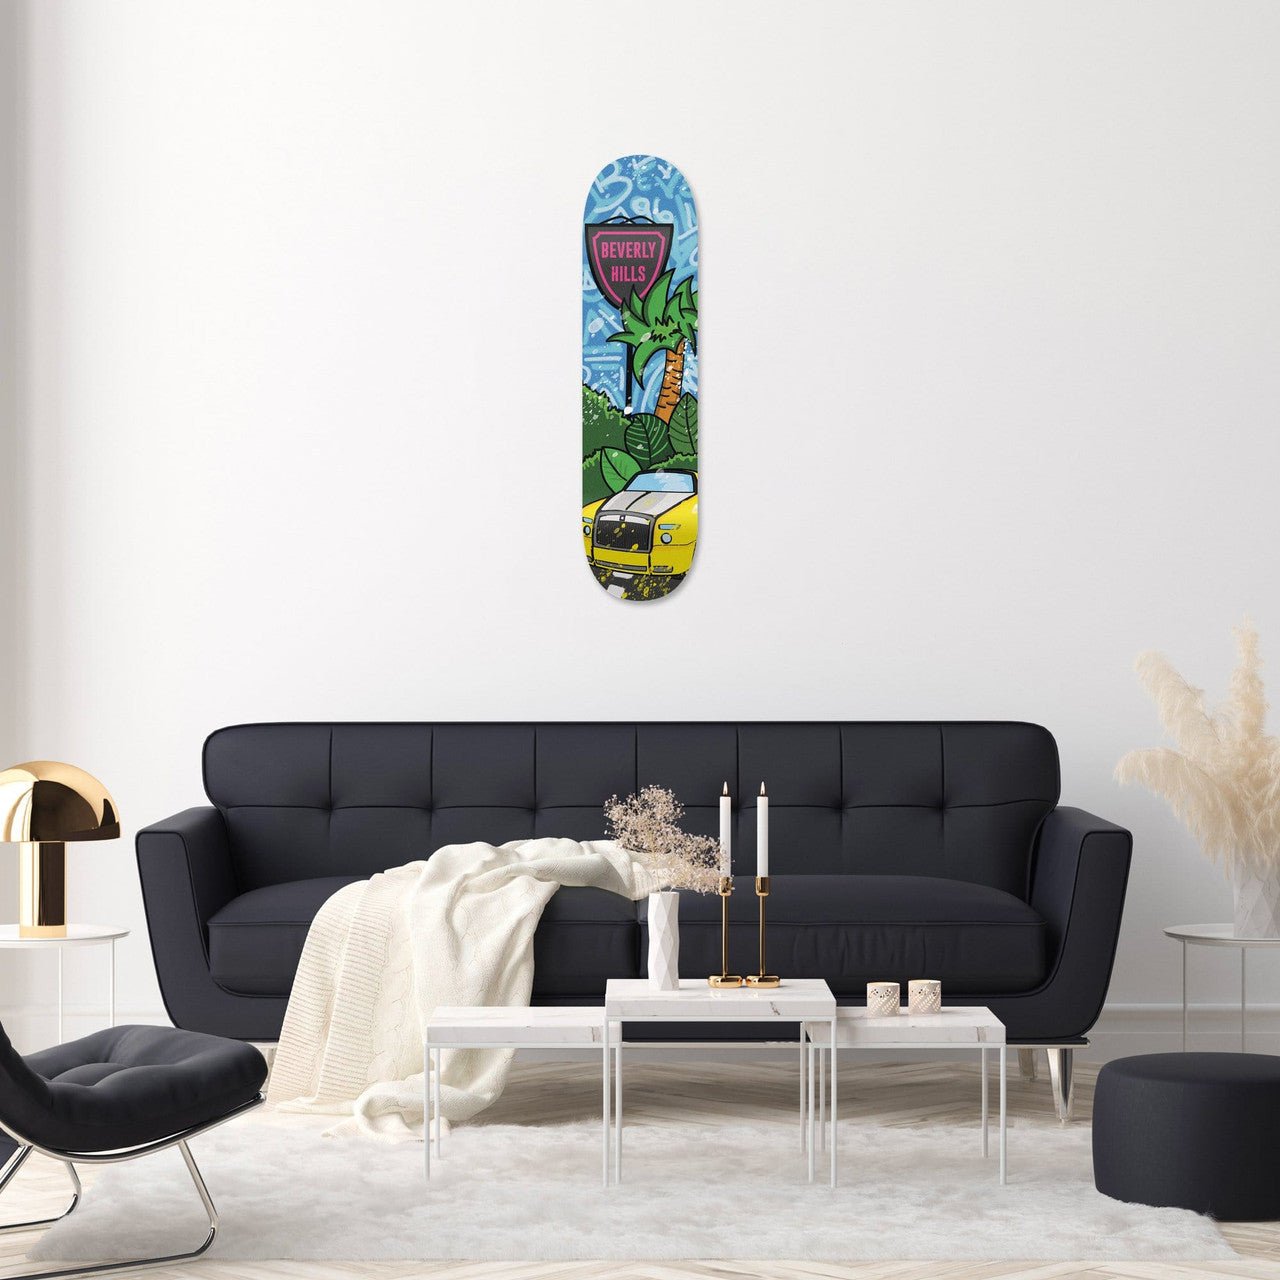 "Beverly Hills: Double R" - Skateboard - The Art Lab Acrylic Glass Art - Skateboards, Surfboards & Glass Prints Wall Decor for your Home.